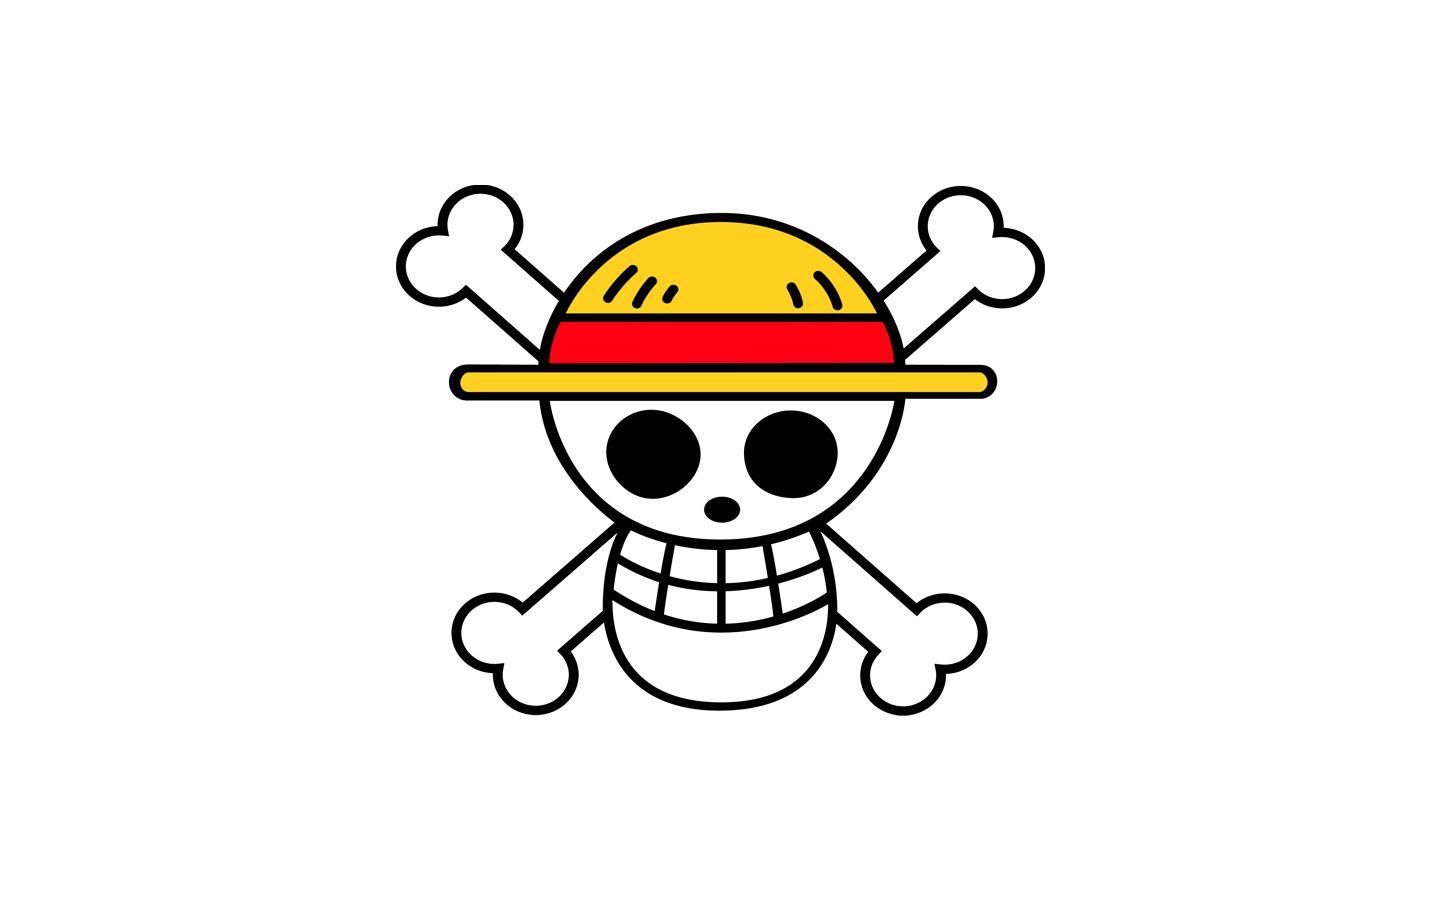 Straw Hat Pirate Flag Wallpapers - Wallpaper Cave